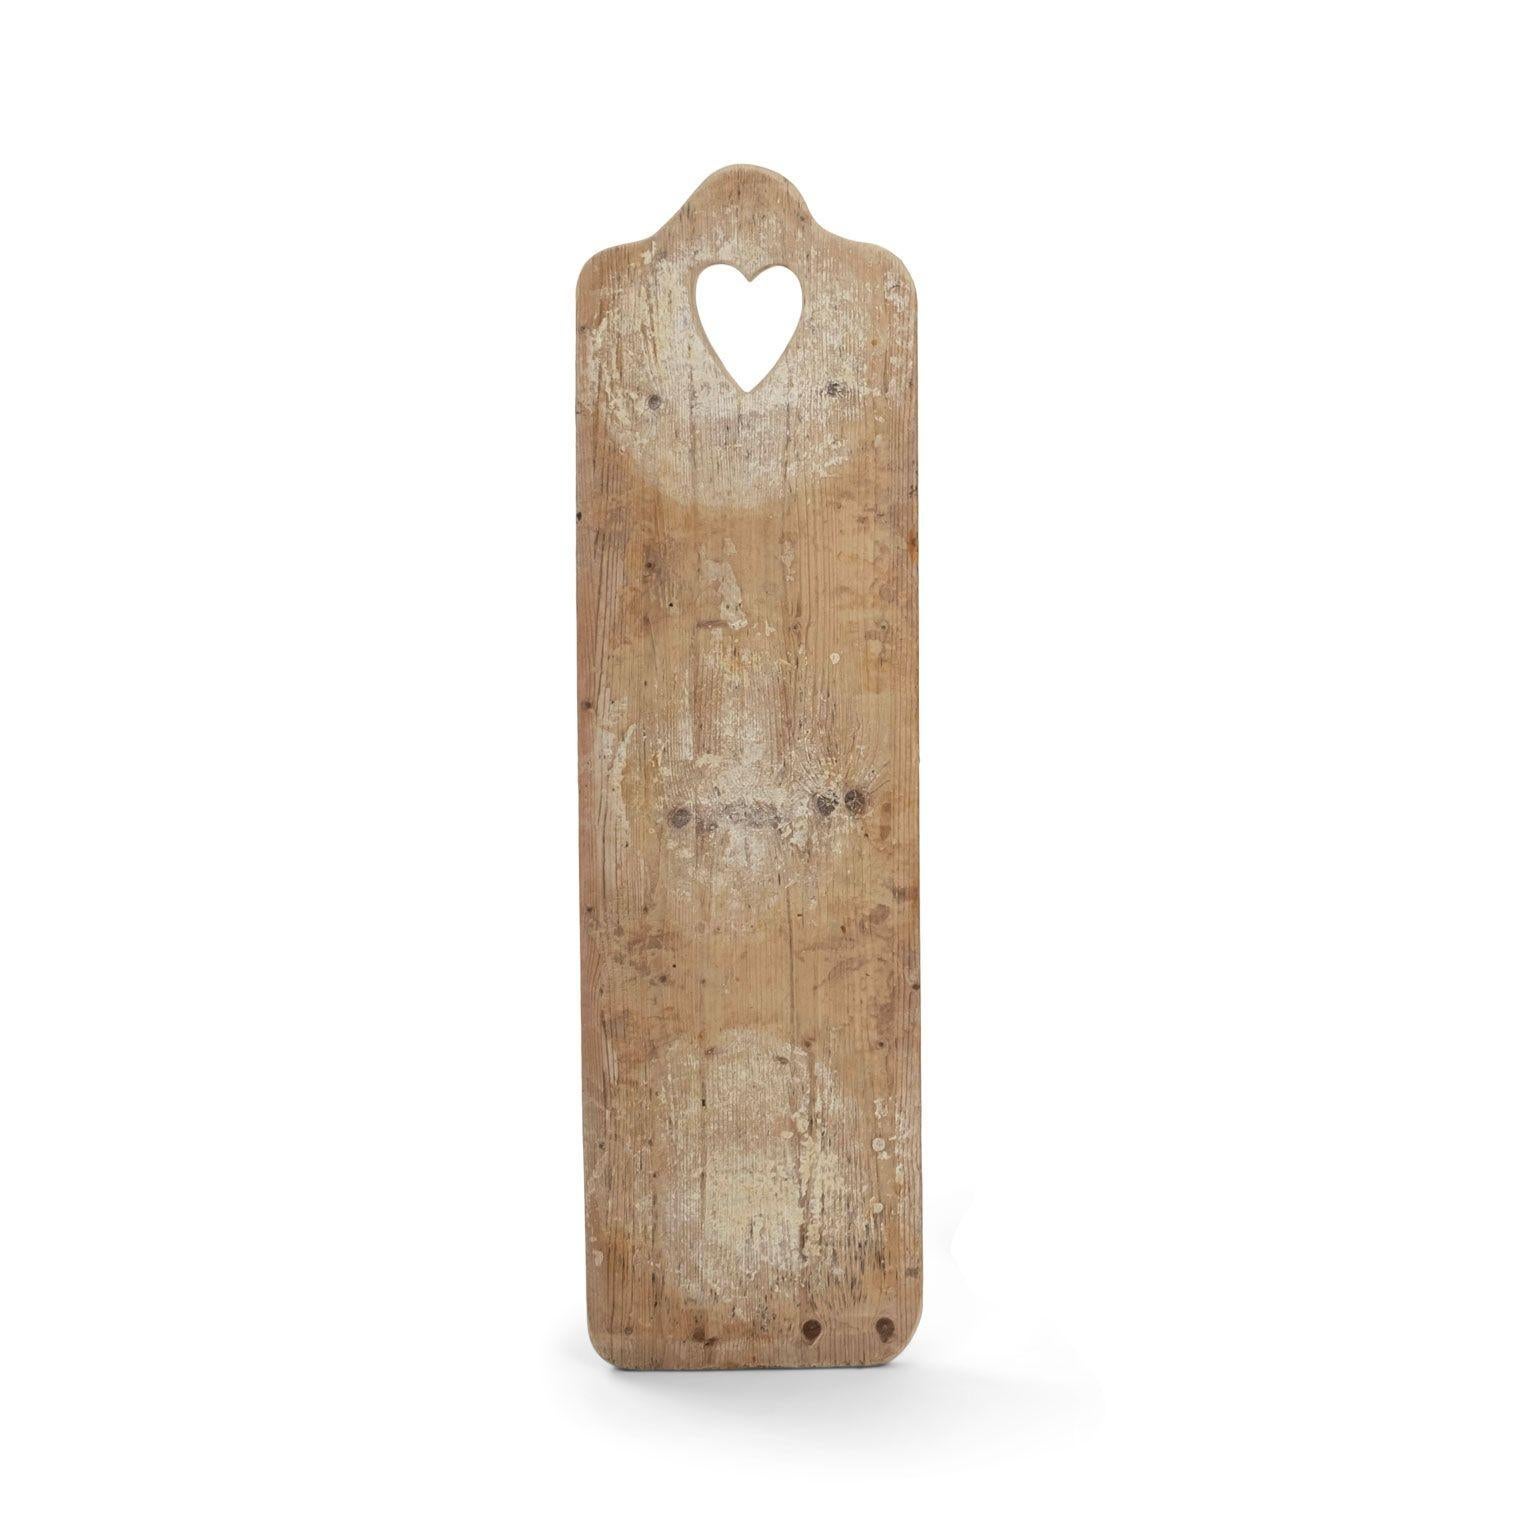 Antique cheese boards from France, dating to early 20th century. Heart-shaped handles carved into boards. Four available and sold individually, priced $795 each.

Note: Due to regional changes in humidity and climate during shipping, antique wood